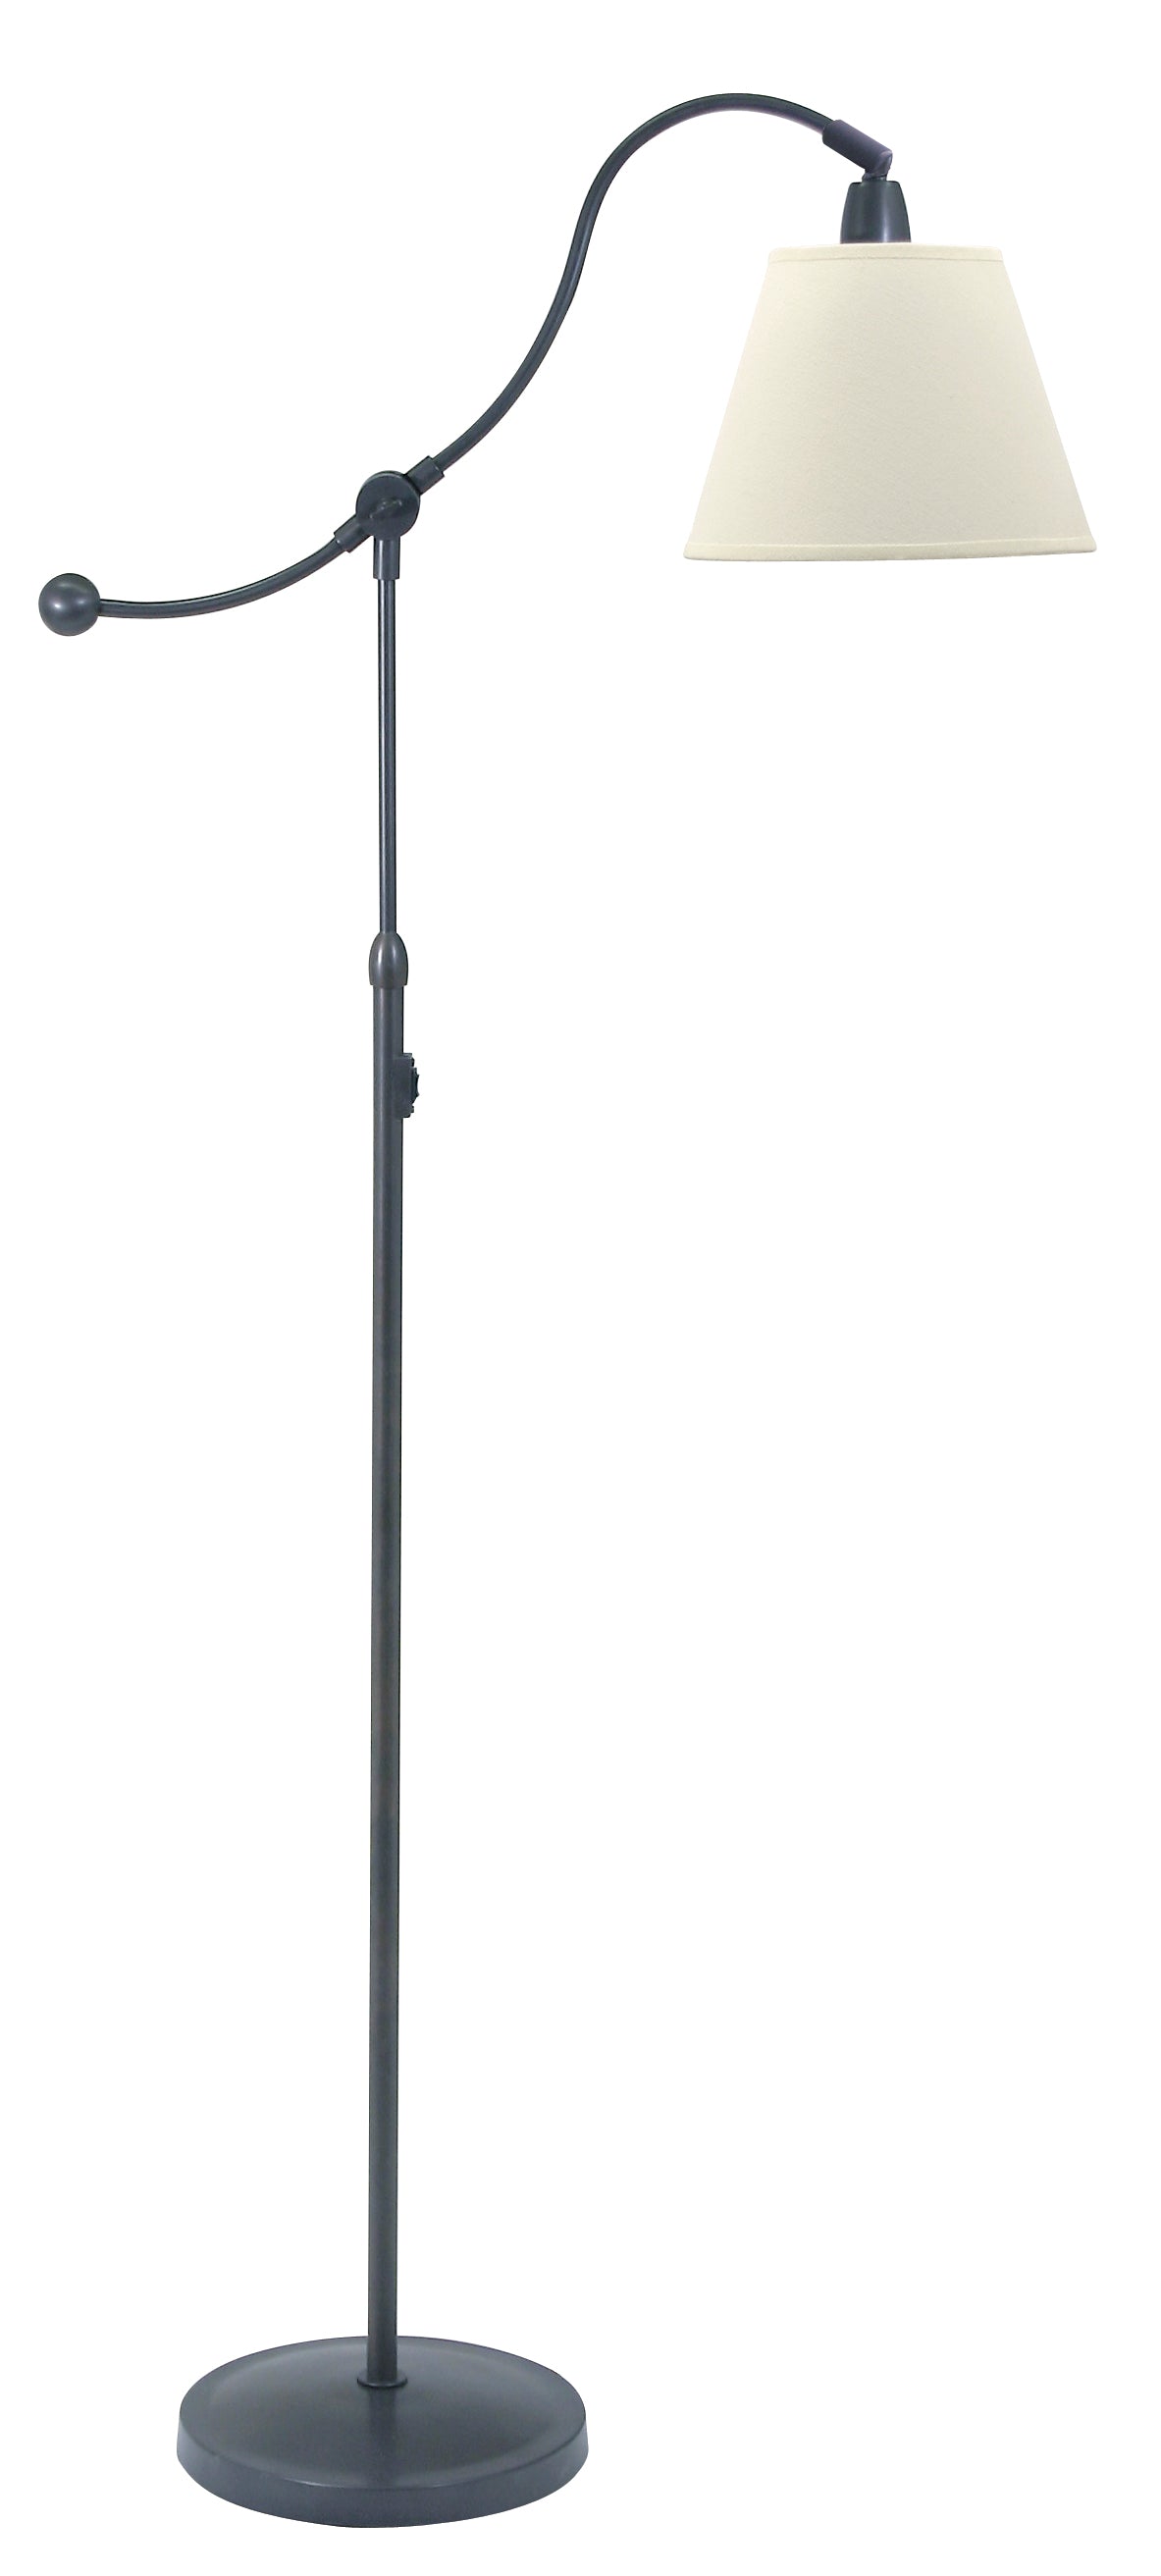 House of Troy Hyde Park Floor Lamp Oil Rubbed Bronze w/White Linen Shade HP700-OB-WL